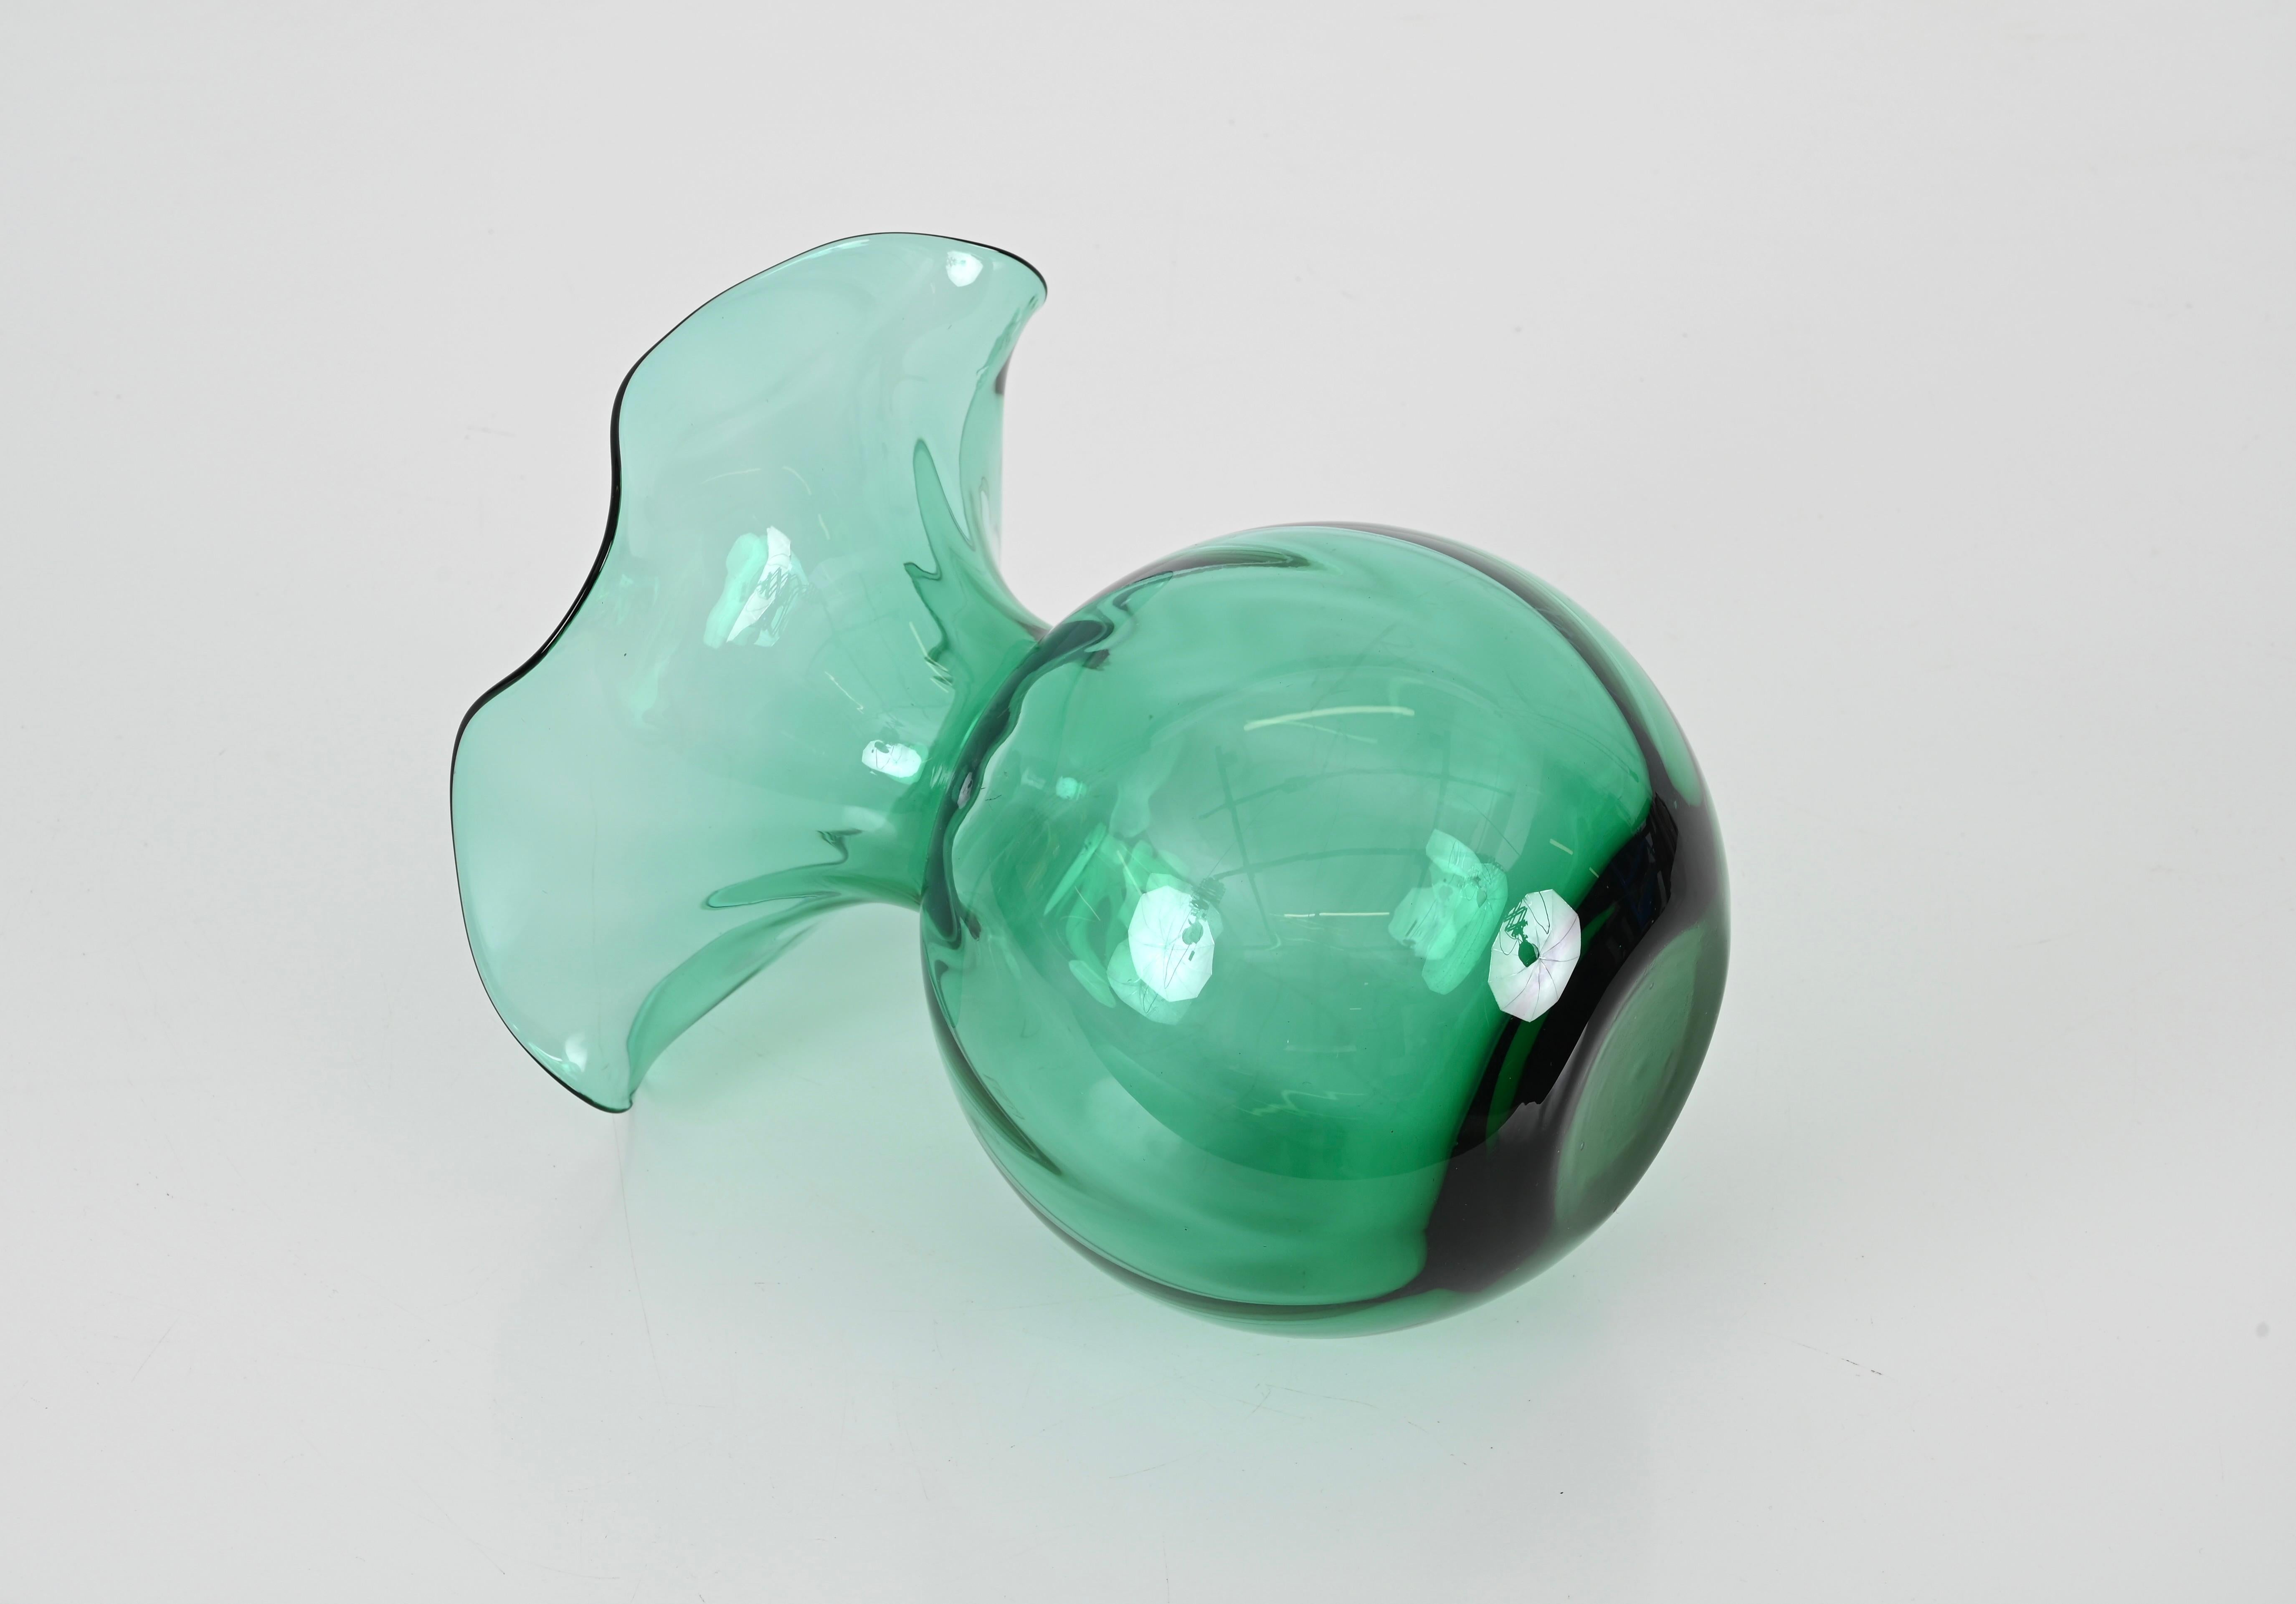 Mid-Century Green Murano Glass Italian Vase by IVV, Italy 1970s For Sale 5